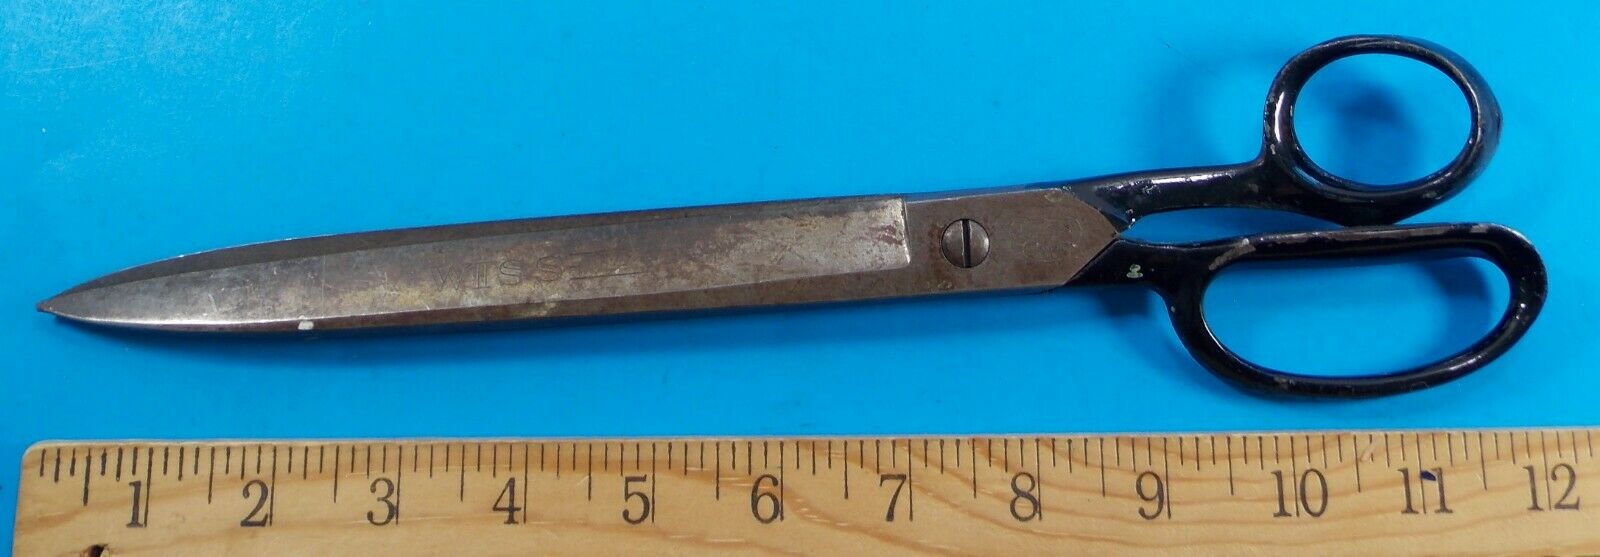 VINTAGE LARGE WISS USA SCISSORS STEEL FORGED NO 82